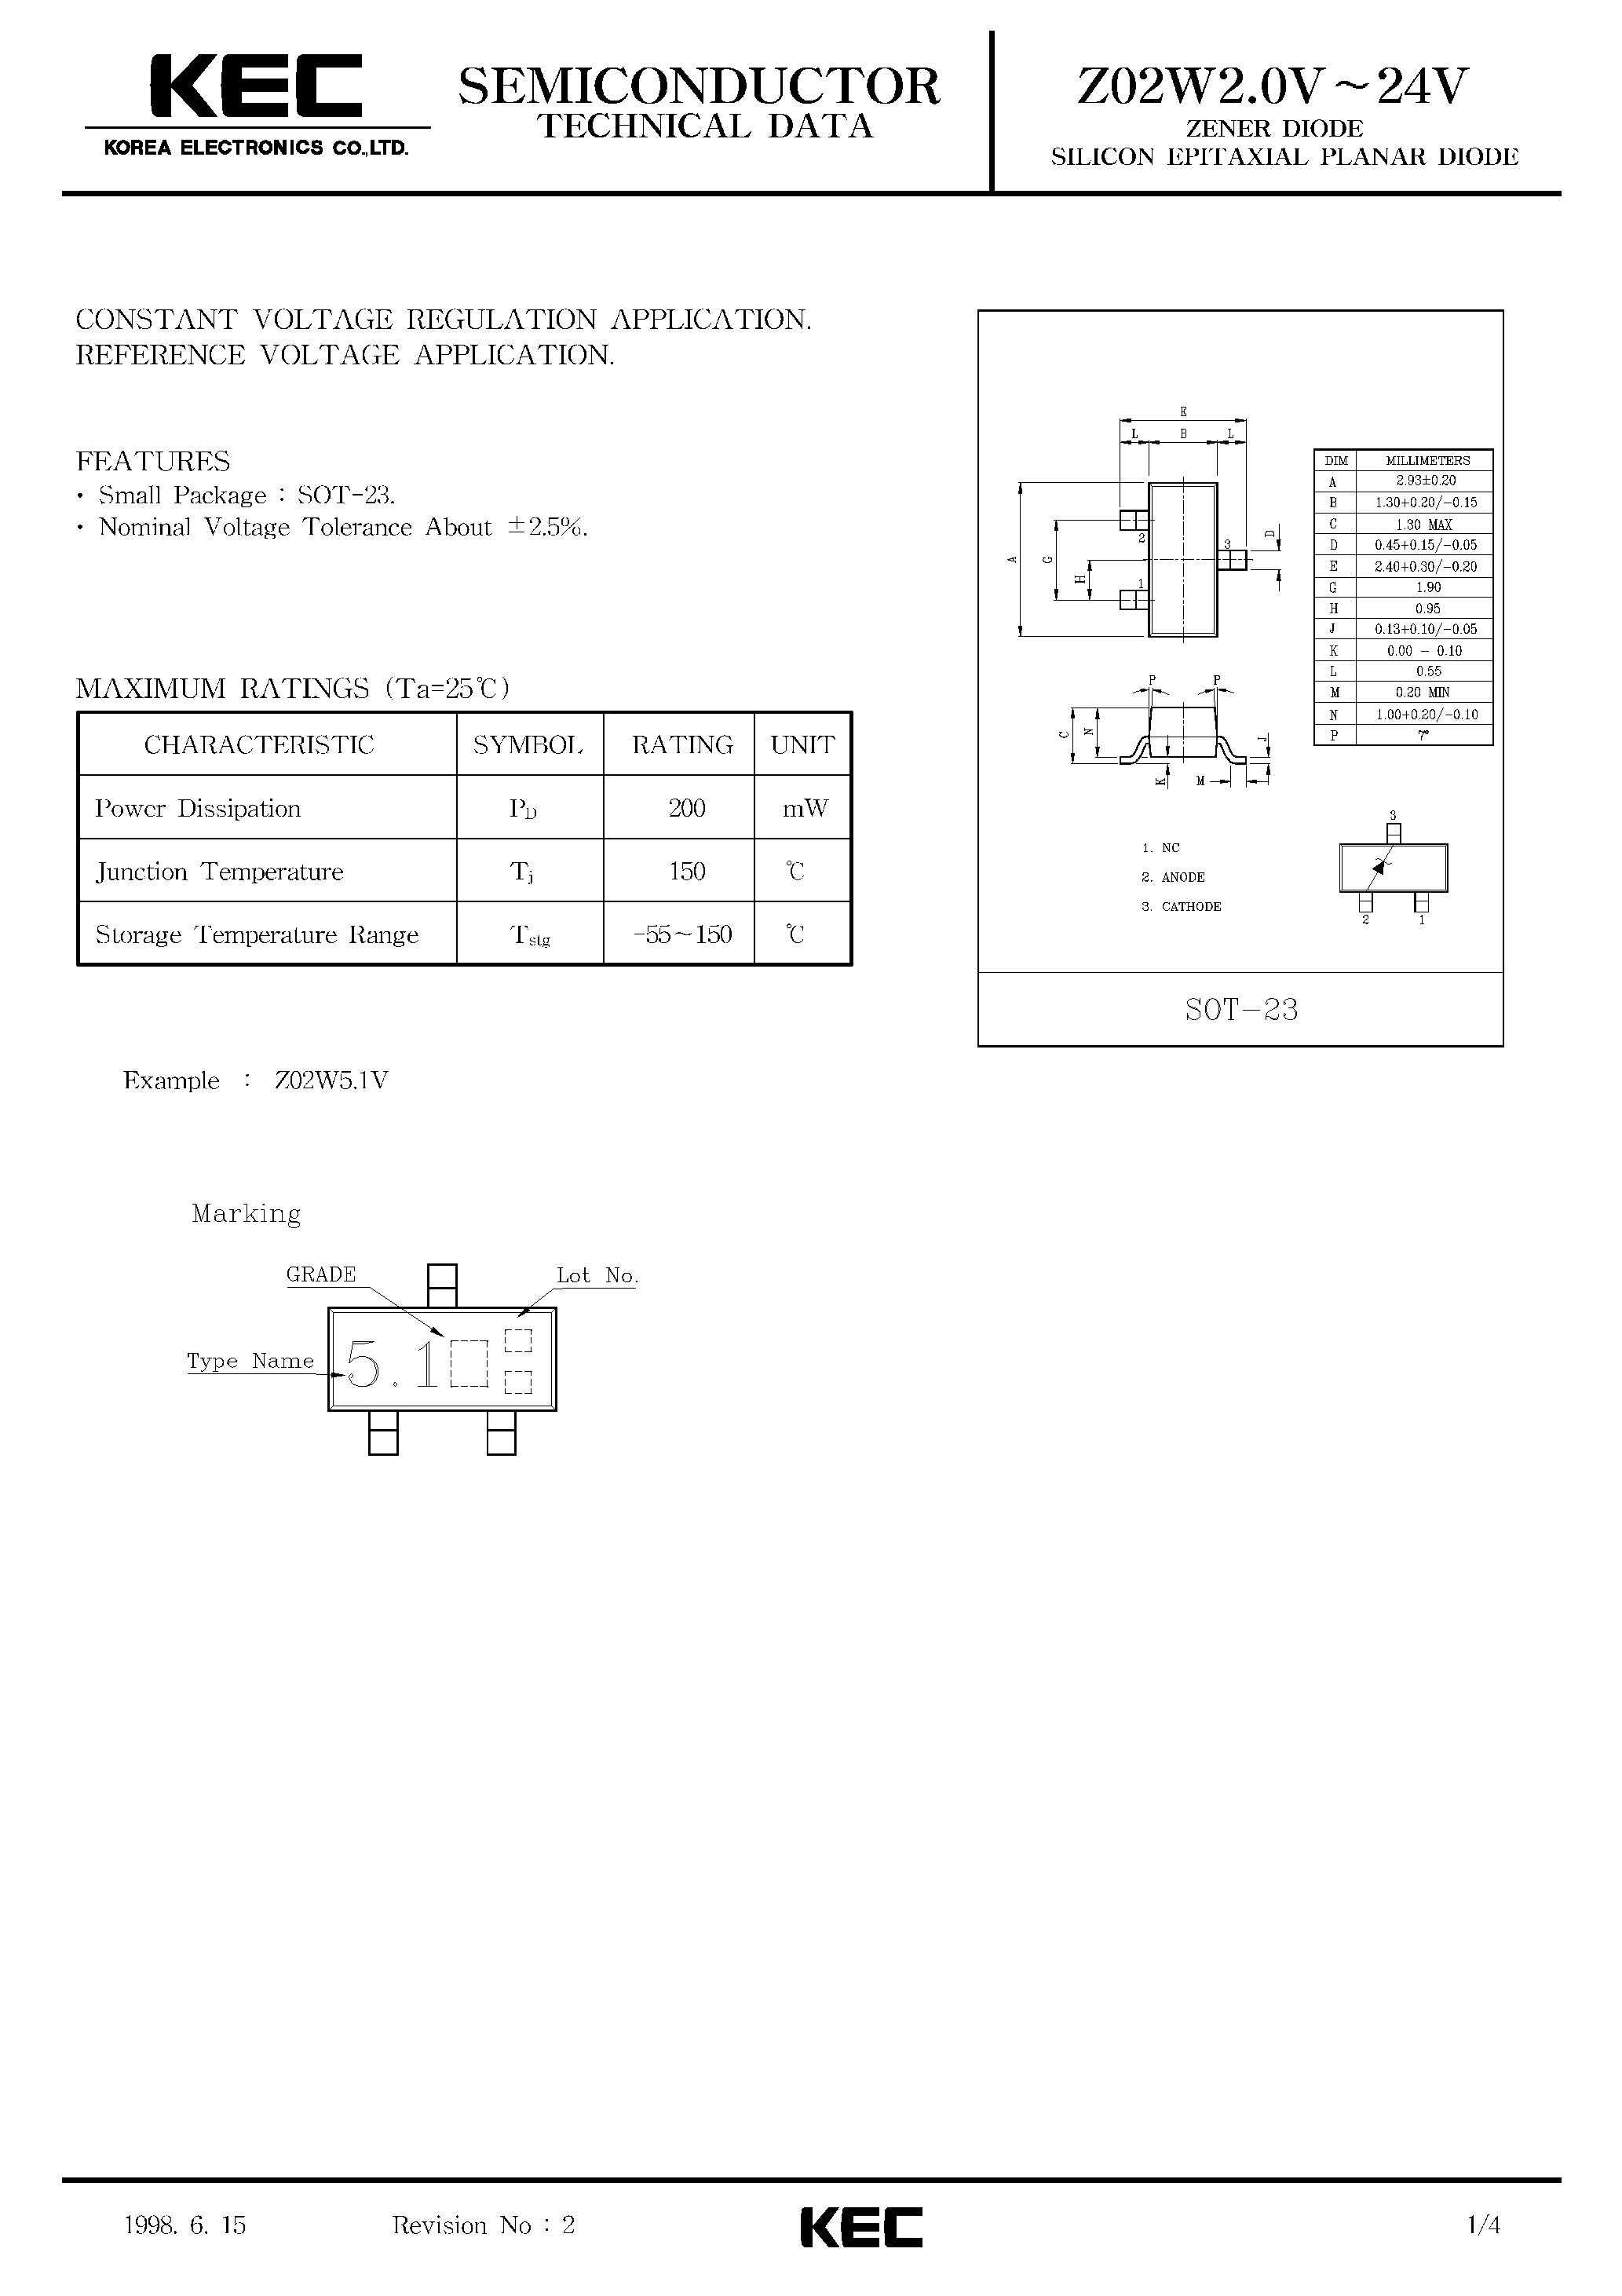 Datasheet Z02W11V - ZENER DIODE SILICON EPITAXIAL PLANAR DIODE page 1